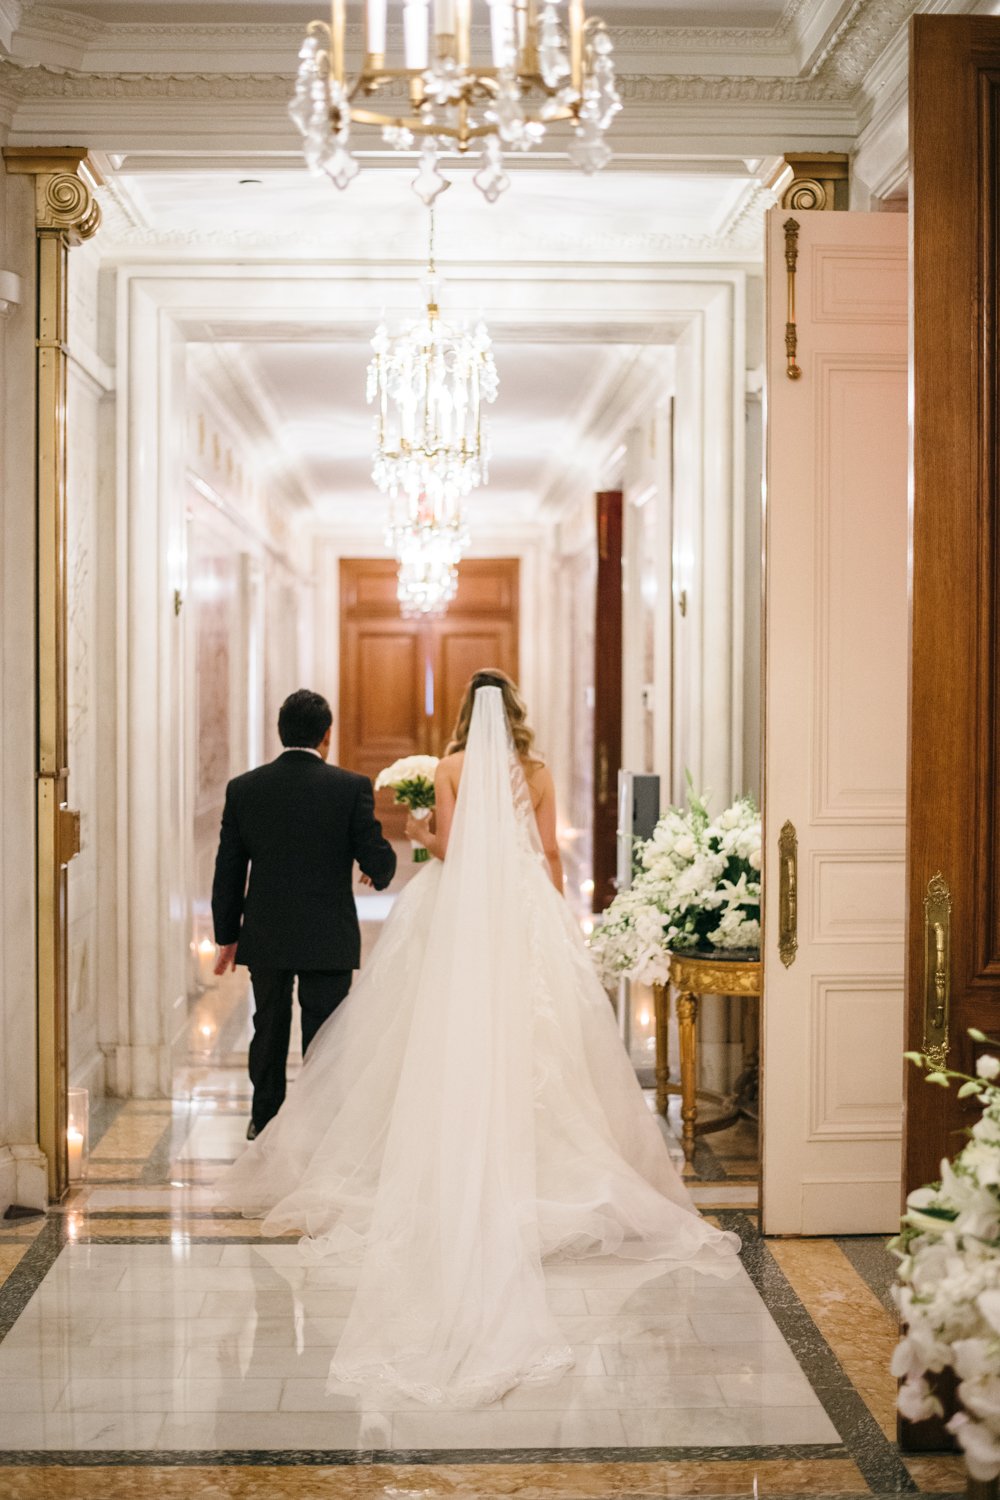 Bride and groom walk down the hall of the St. Regis away from the camera.

Manhattan Luxury Wedding. New York Luxury Wedding Photographer. Wedding in Manhattan. NYC Luxury Wedding.